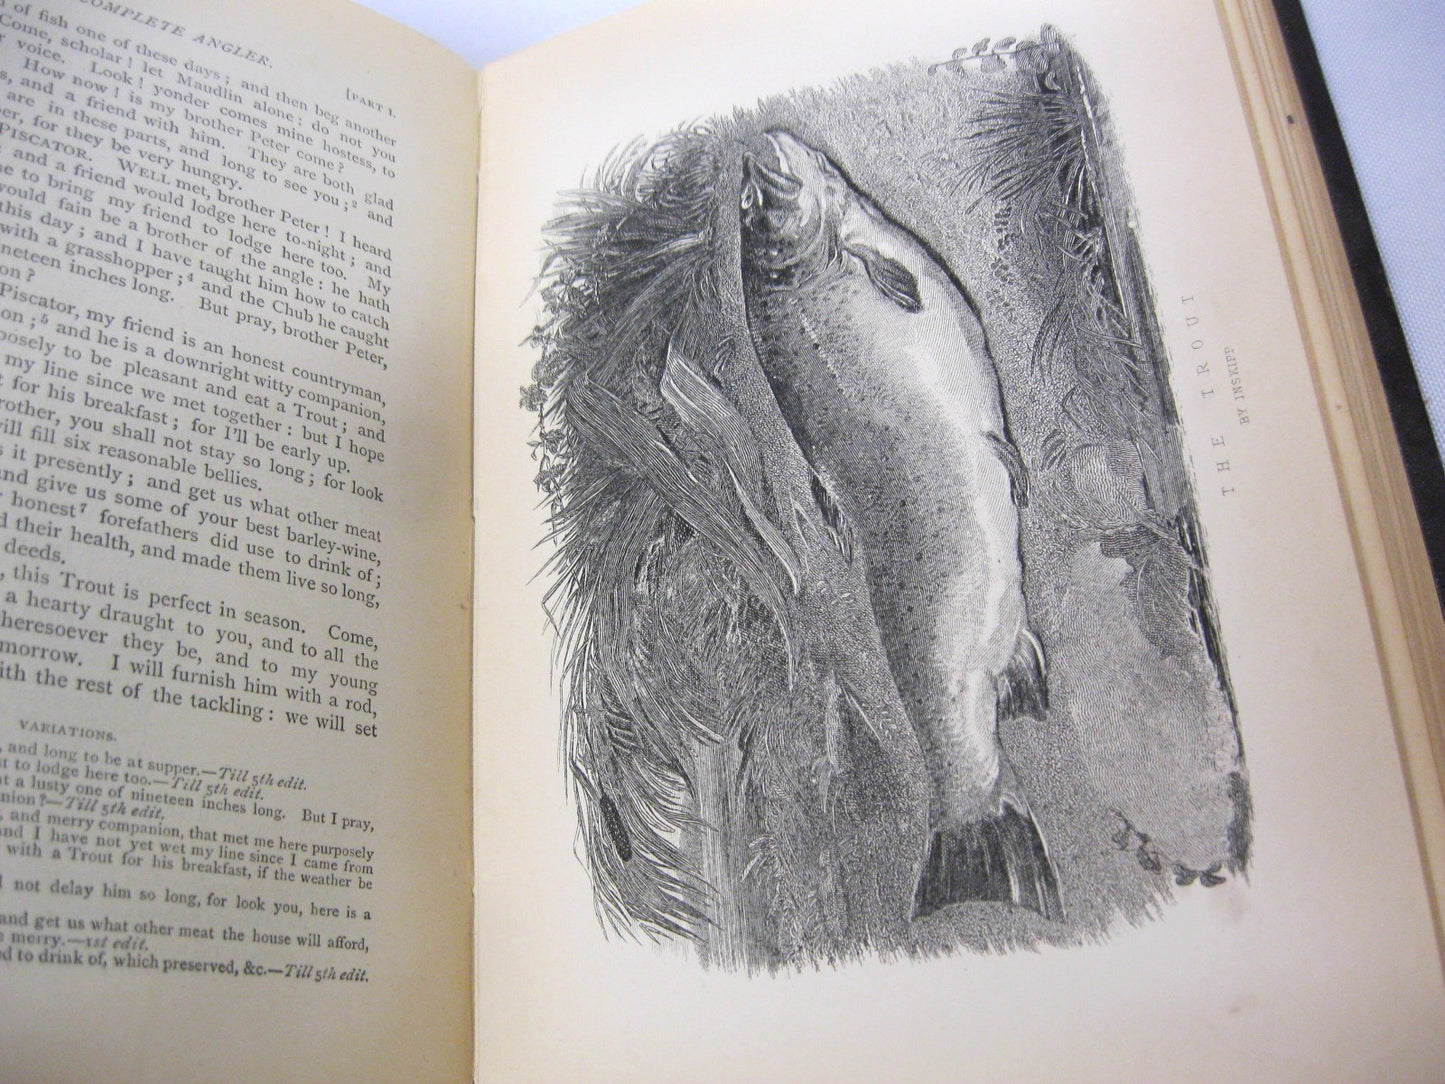 The Complete Angler by Izaak Walton & Charles Cotton